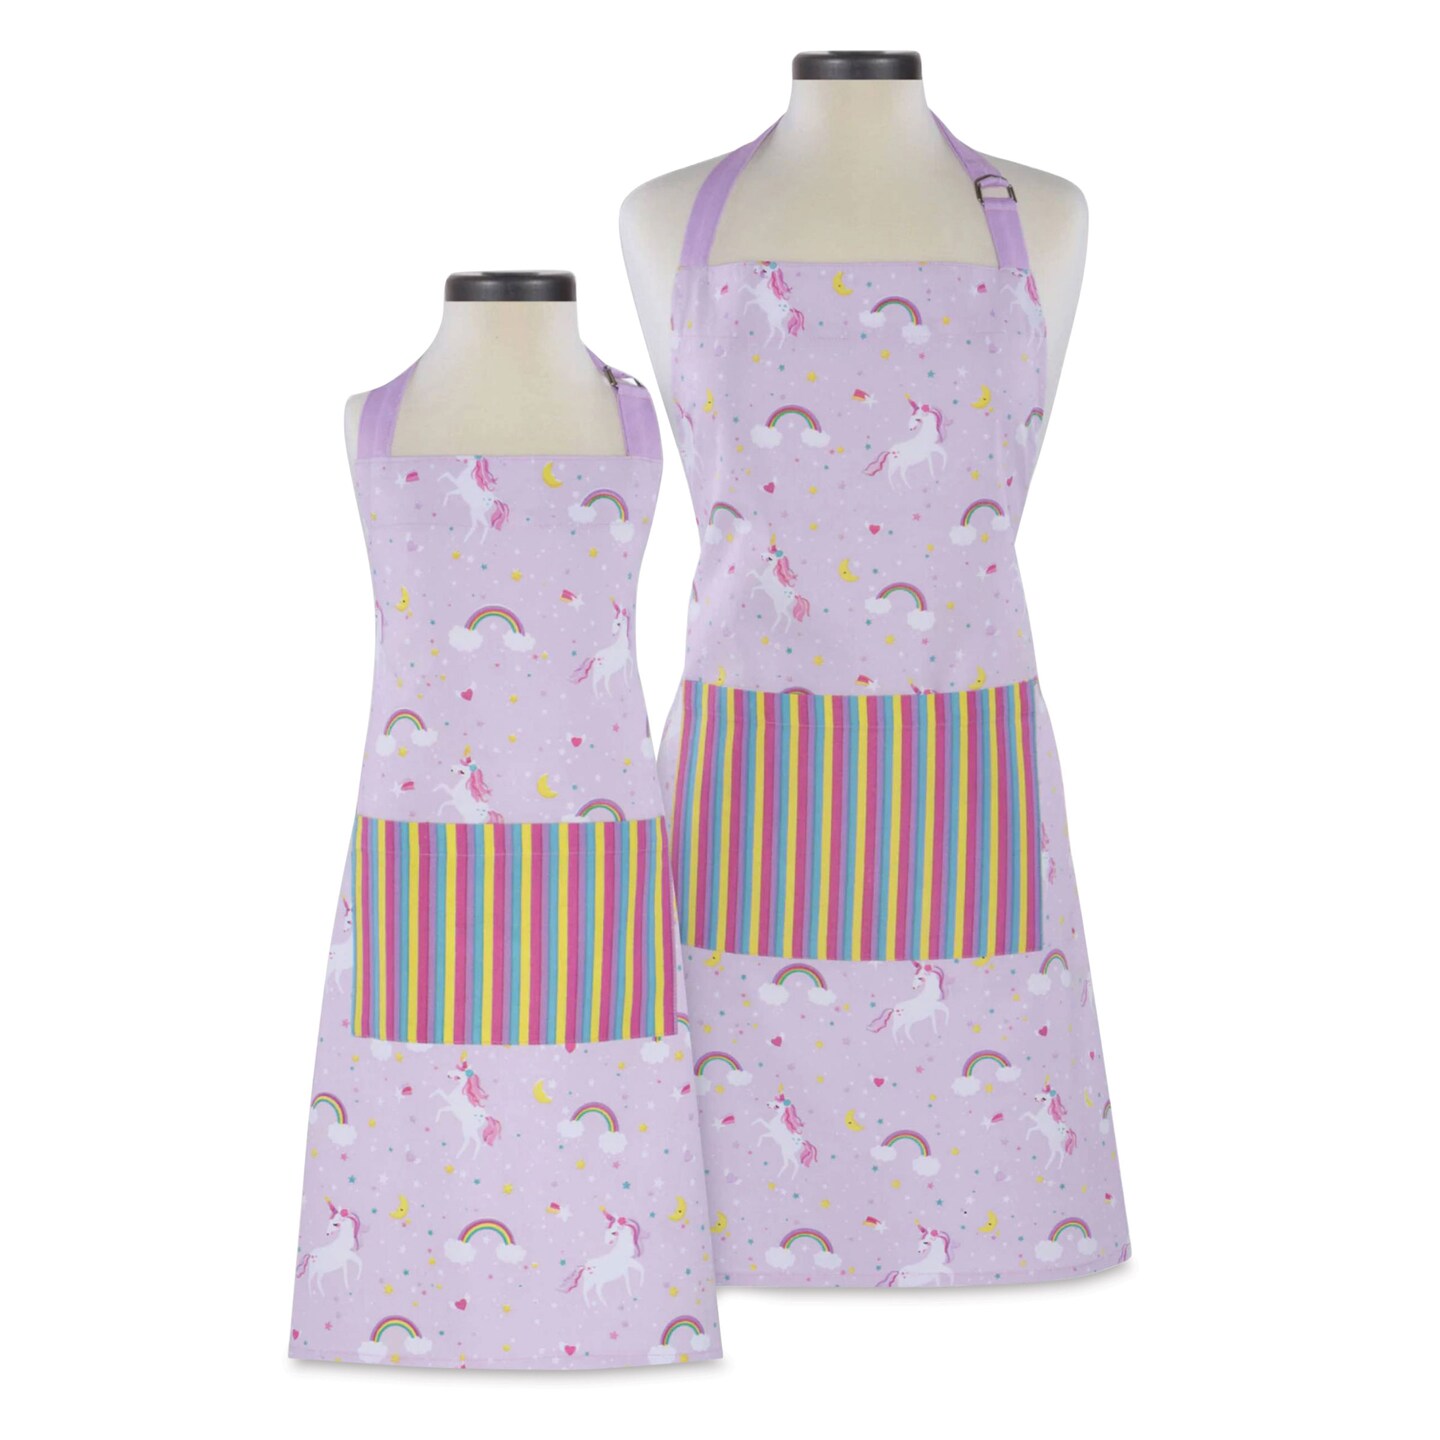 Handstand Kitchen Adult and Youth Apron Boxed Set - Rainbows and Unicorns